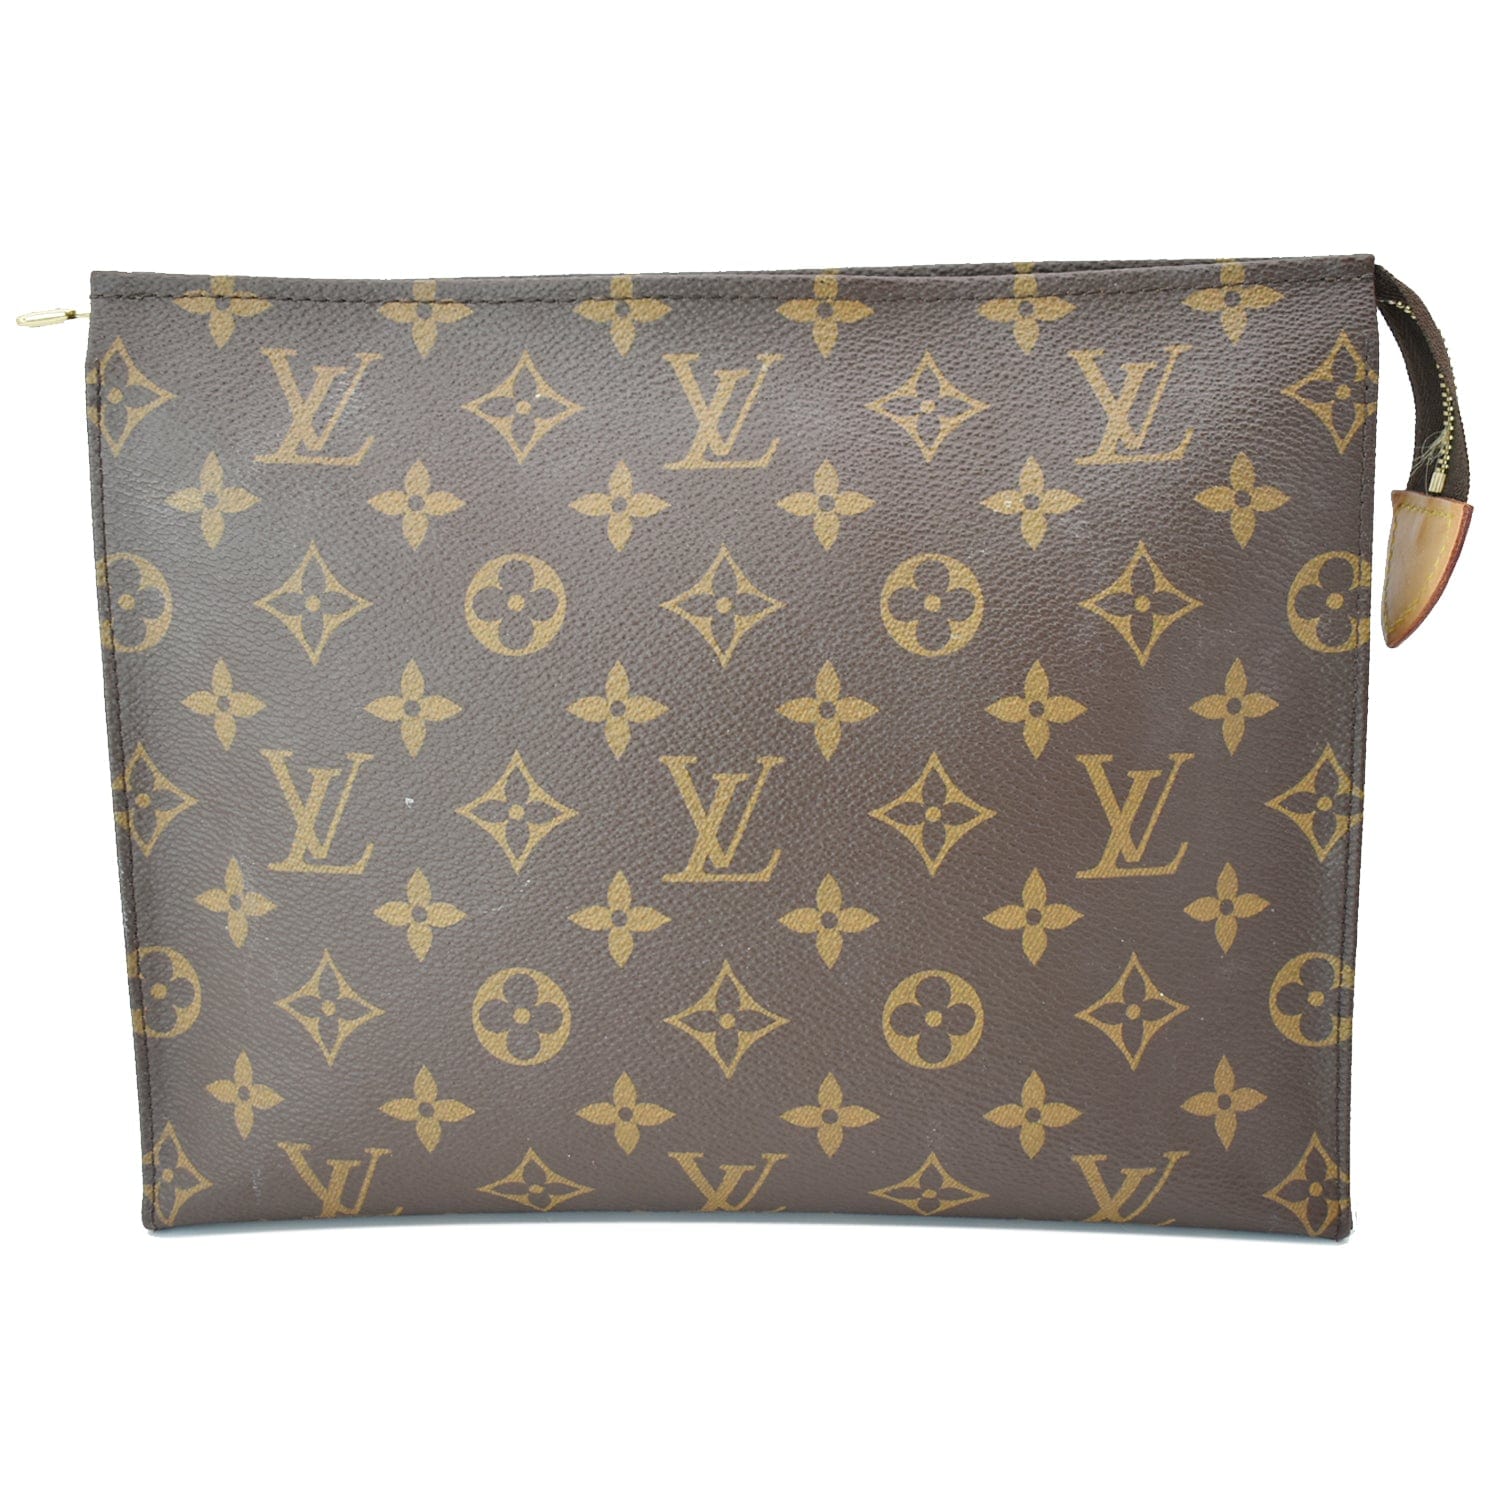 Louis Vuitton Discontinued Monogram Toiletry Pouch 26 Cosmetic Case 1224lv40